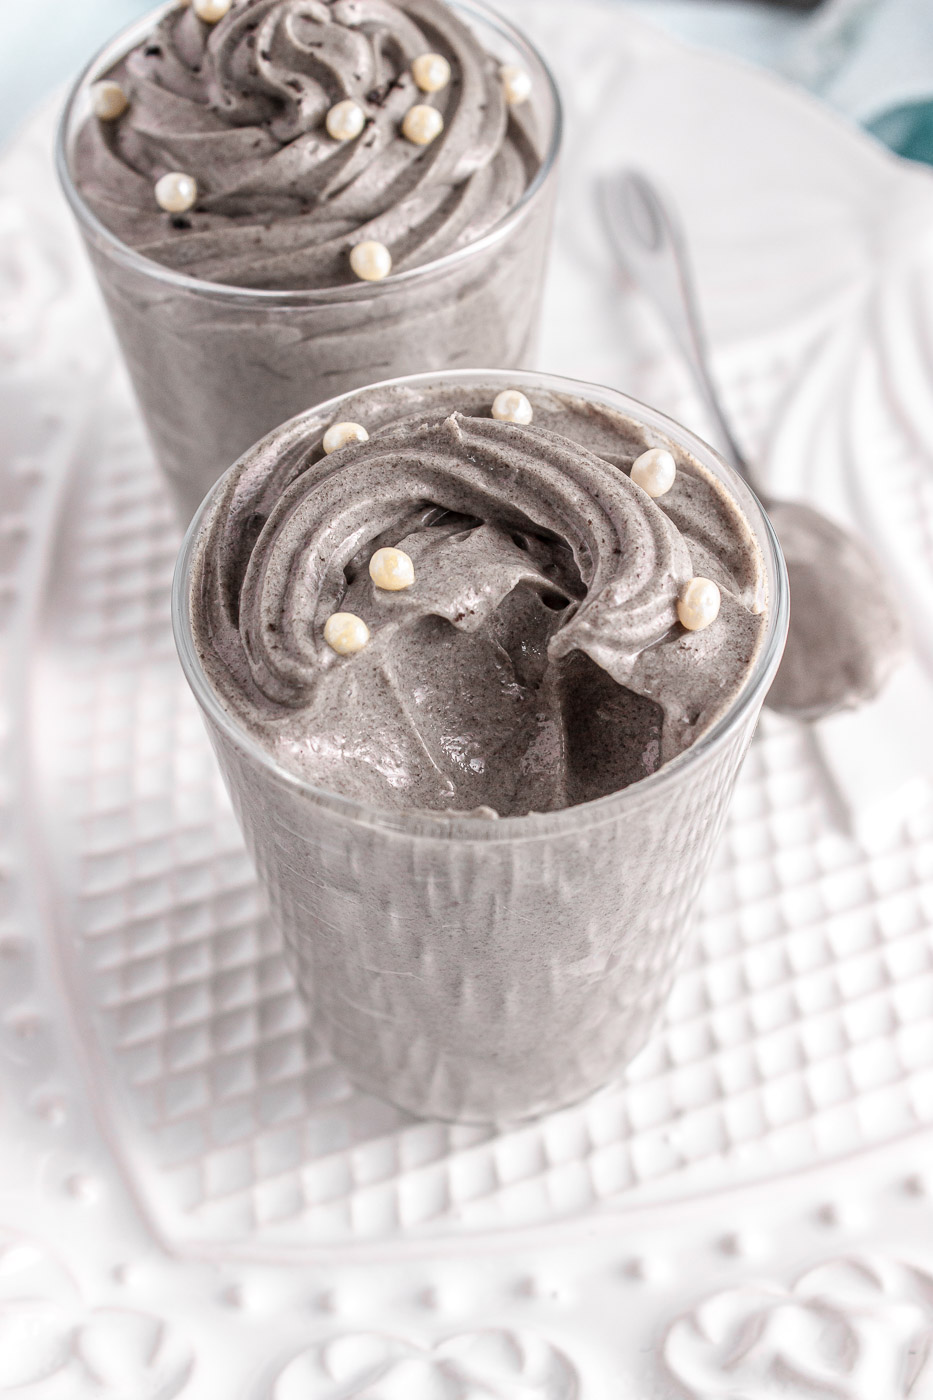 Glass jars are filled with piped and swirled grey stuff dessert topped with white sprinkles. One of the desserts has a spoonful removed from it